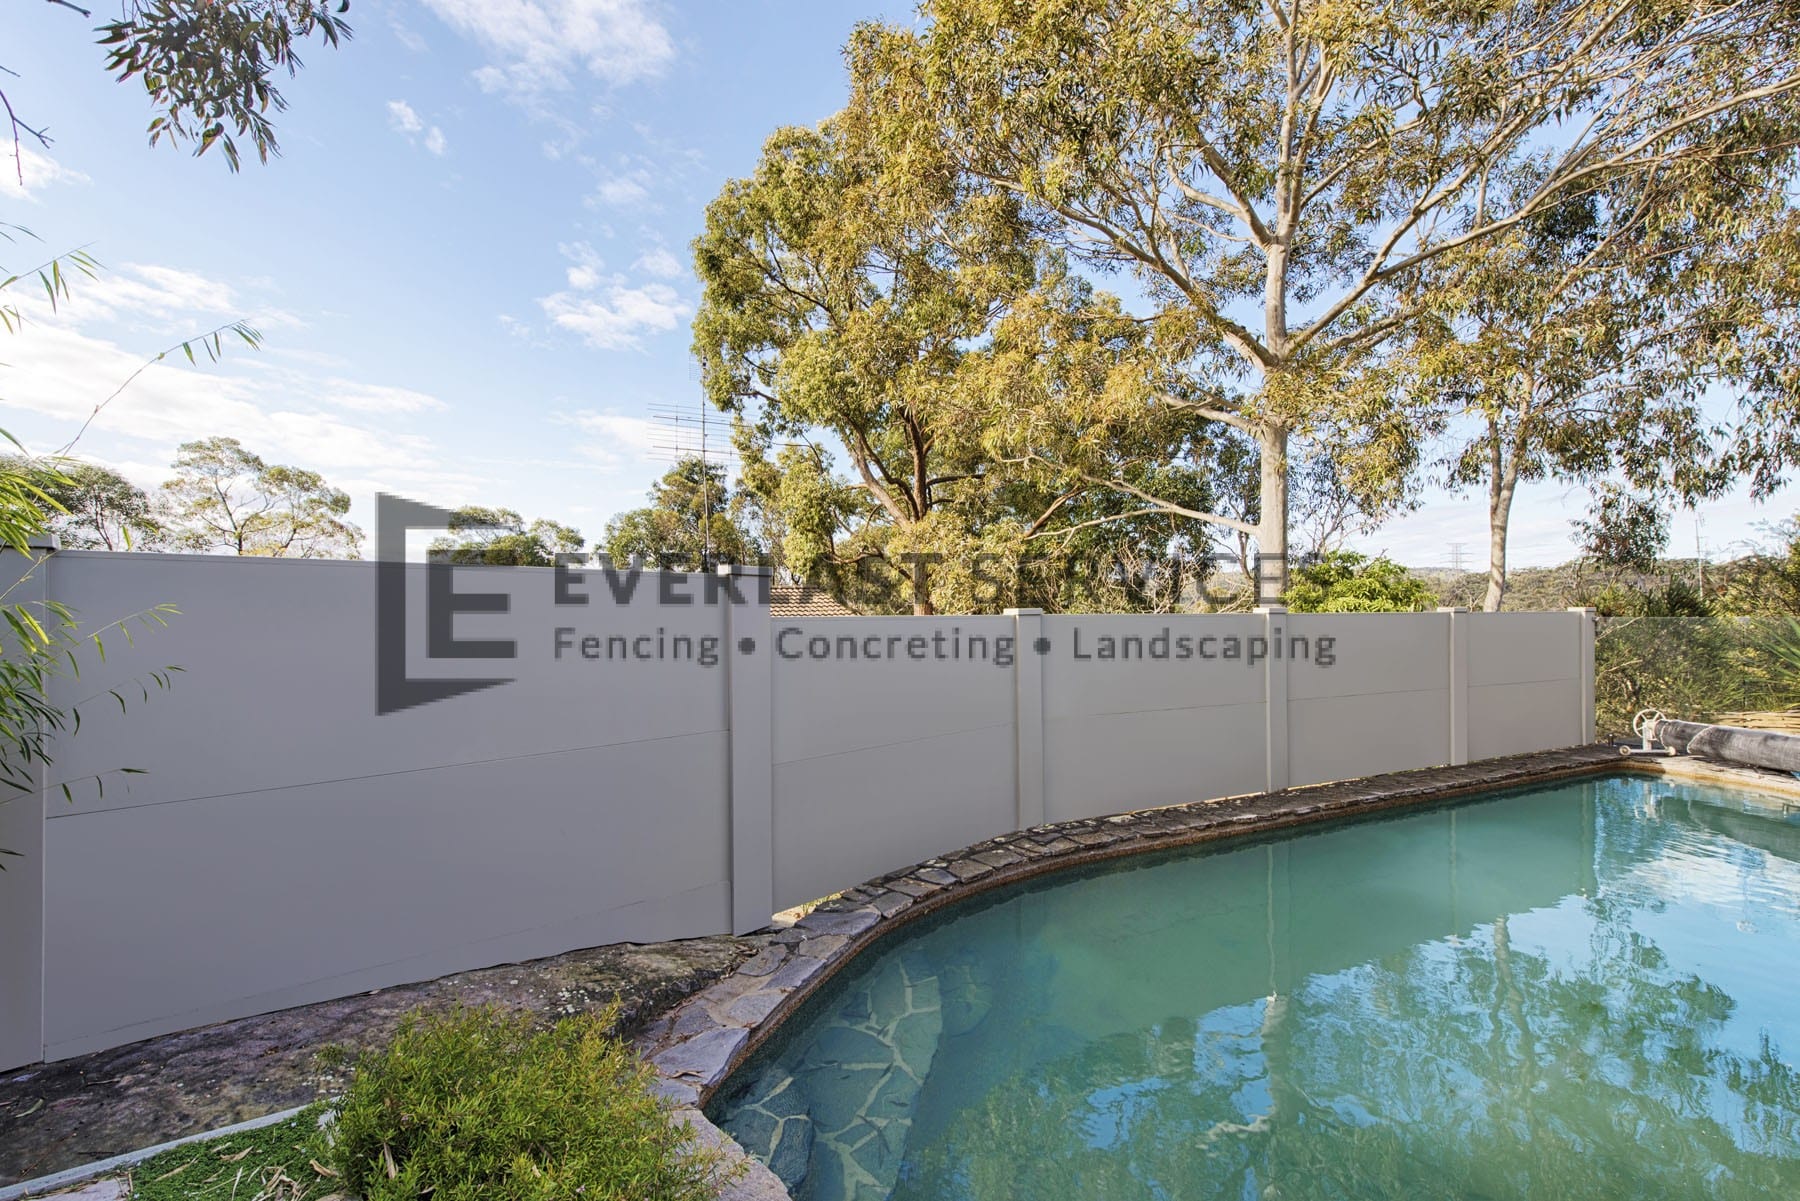 Swimming-Pool-Backyard-Fence-Large-Trees - Everlast Services